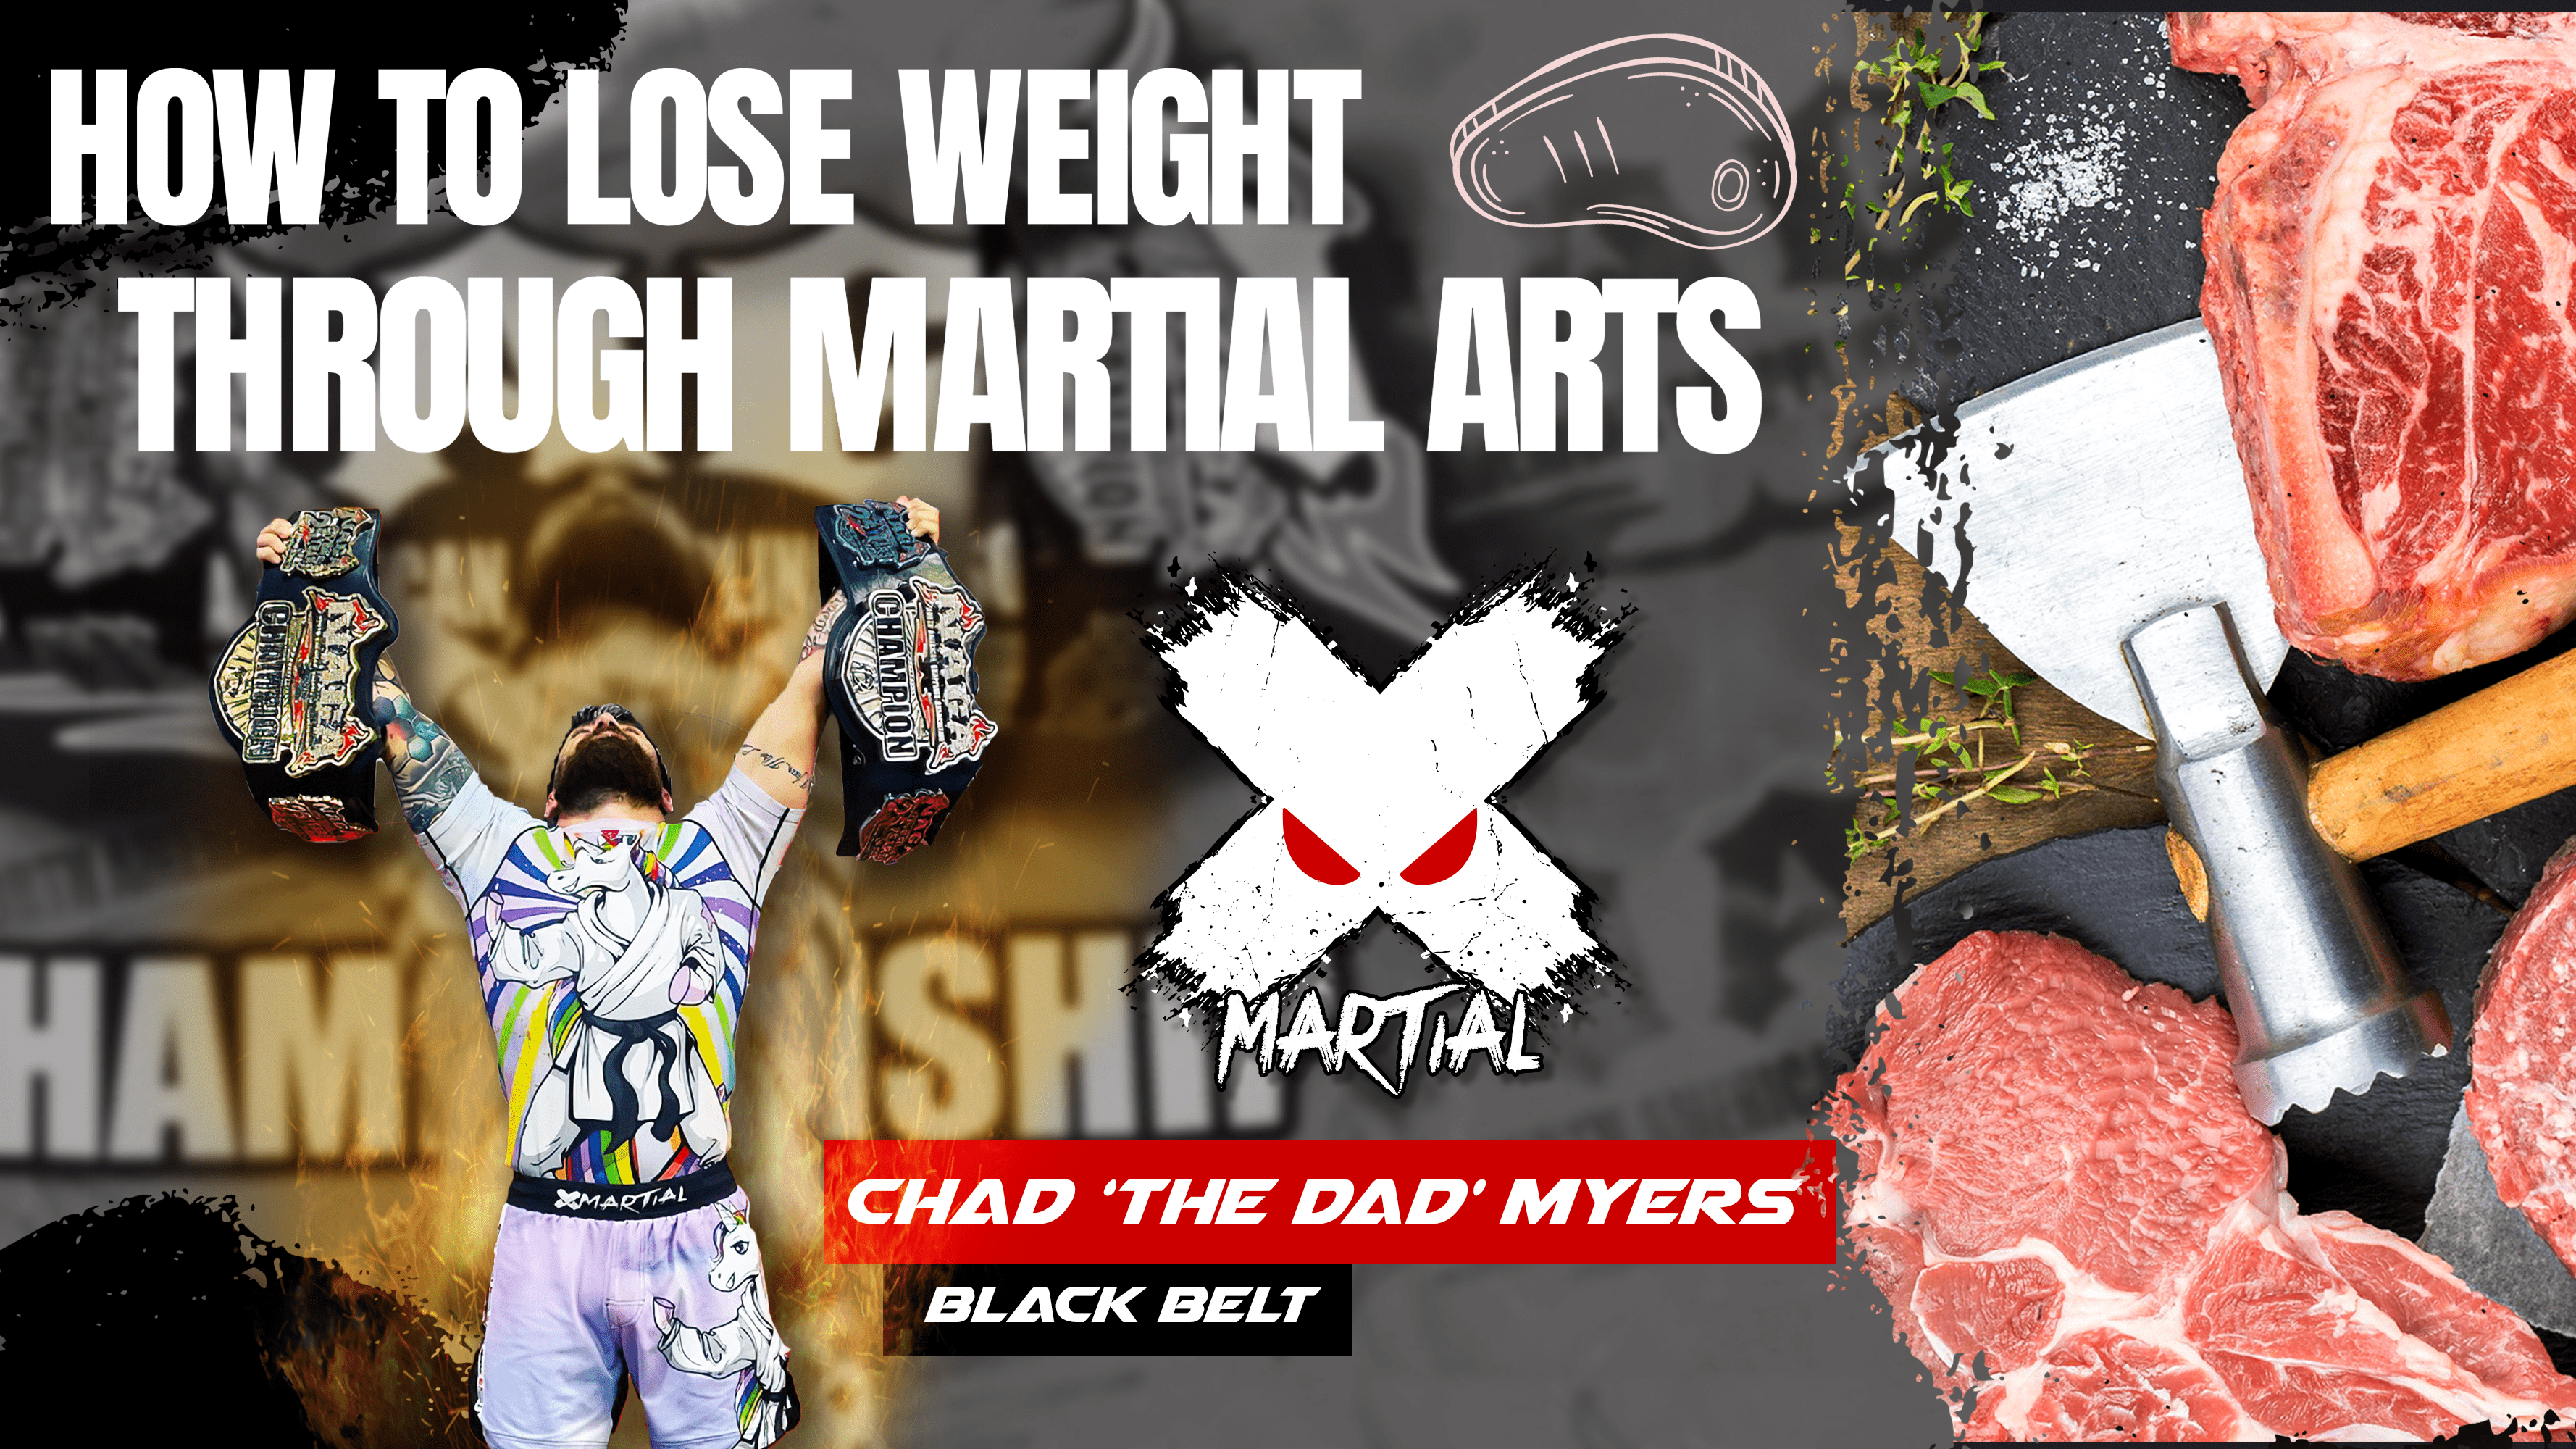 How to lose weight through martial arts by Black-Belt Chad 'The Dad' Myers XMARTIAL